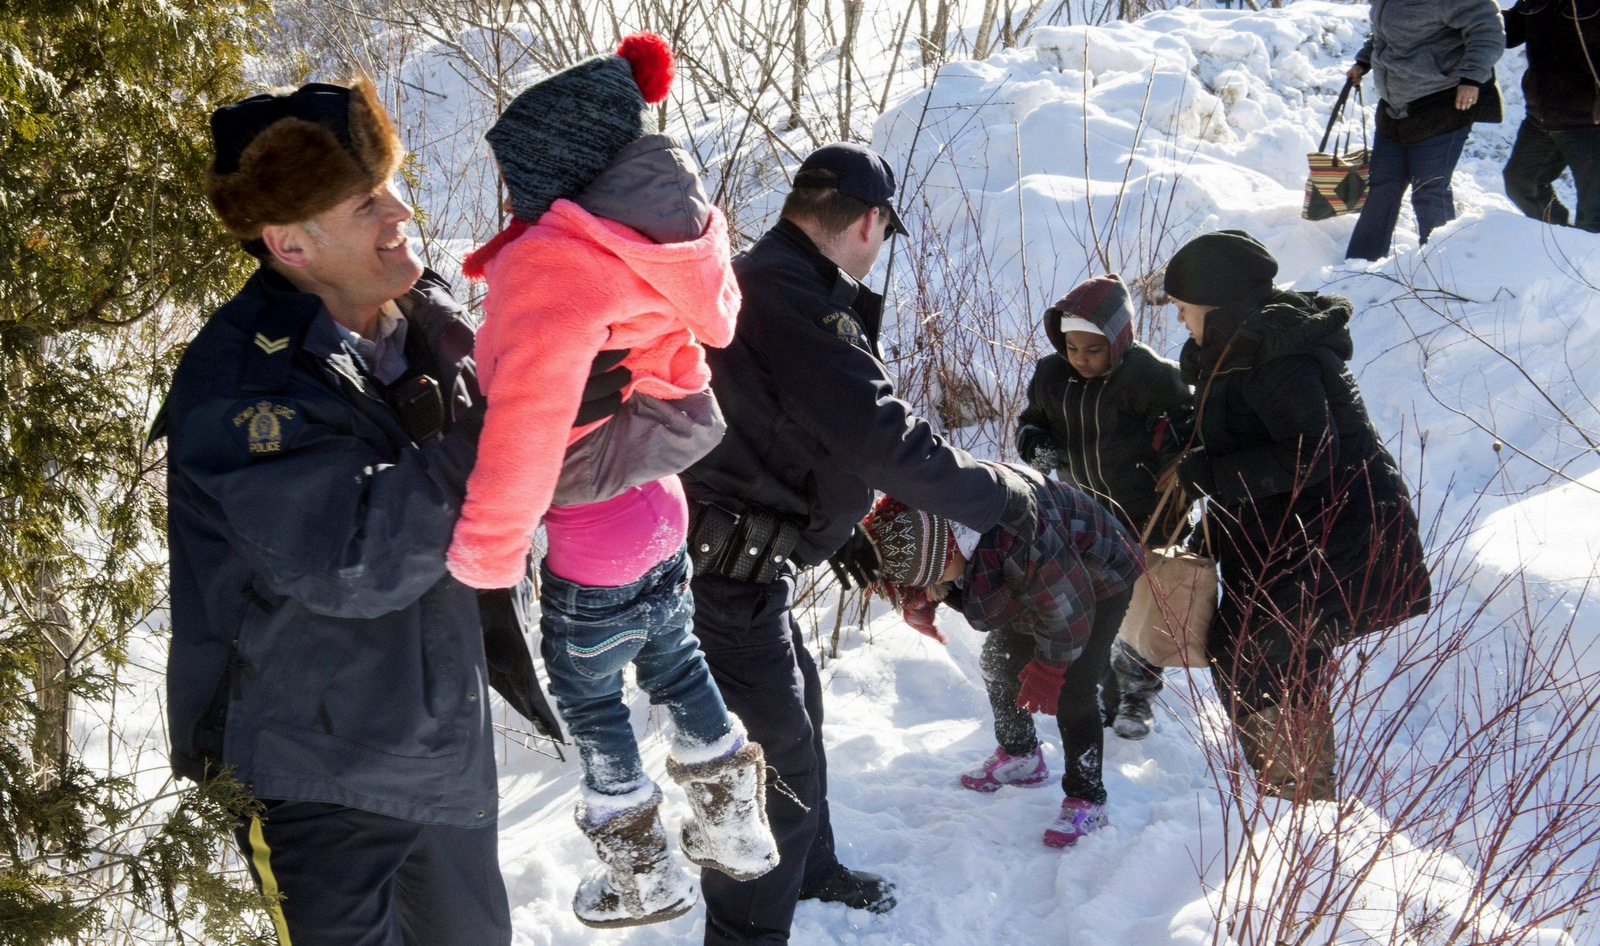 Family members are helped into Canada by Royal Canadian Mounted Police officers along the U.S.-Canada border near Hemmingford, Quebec. (Canadian Press via AP)